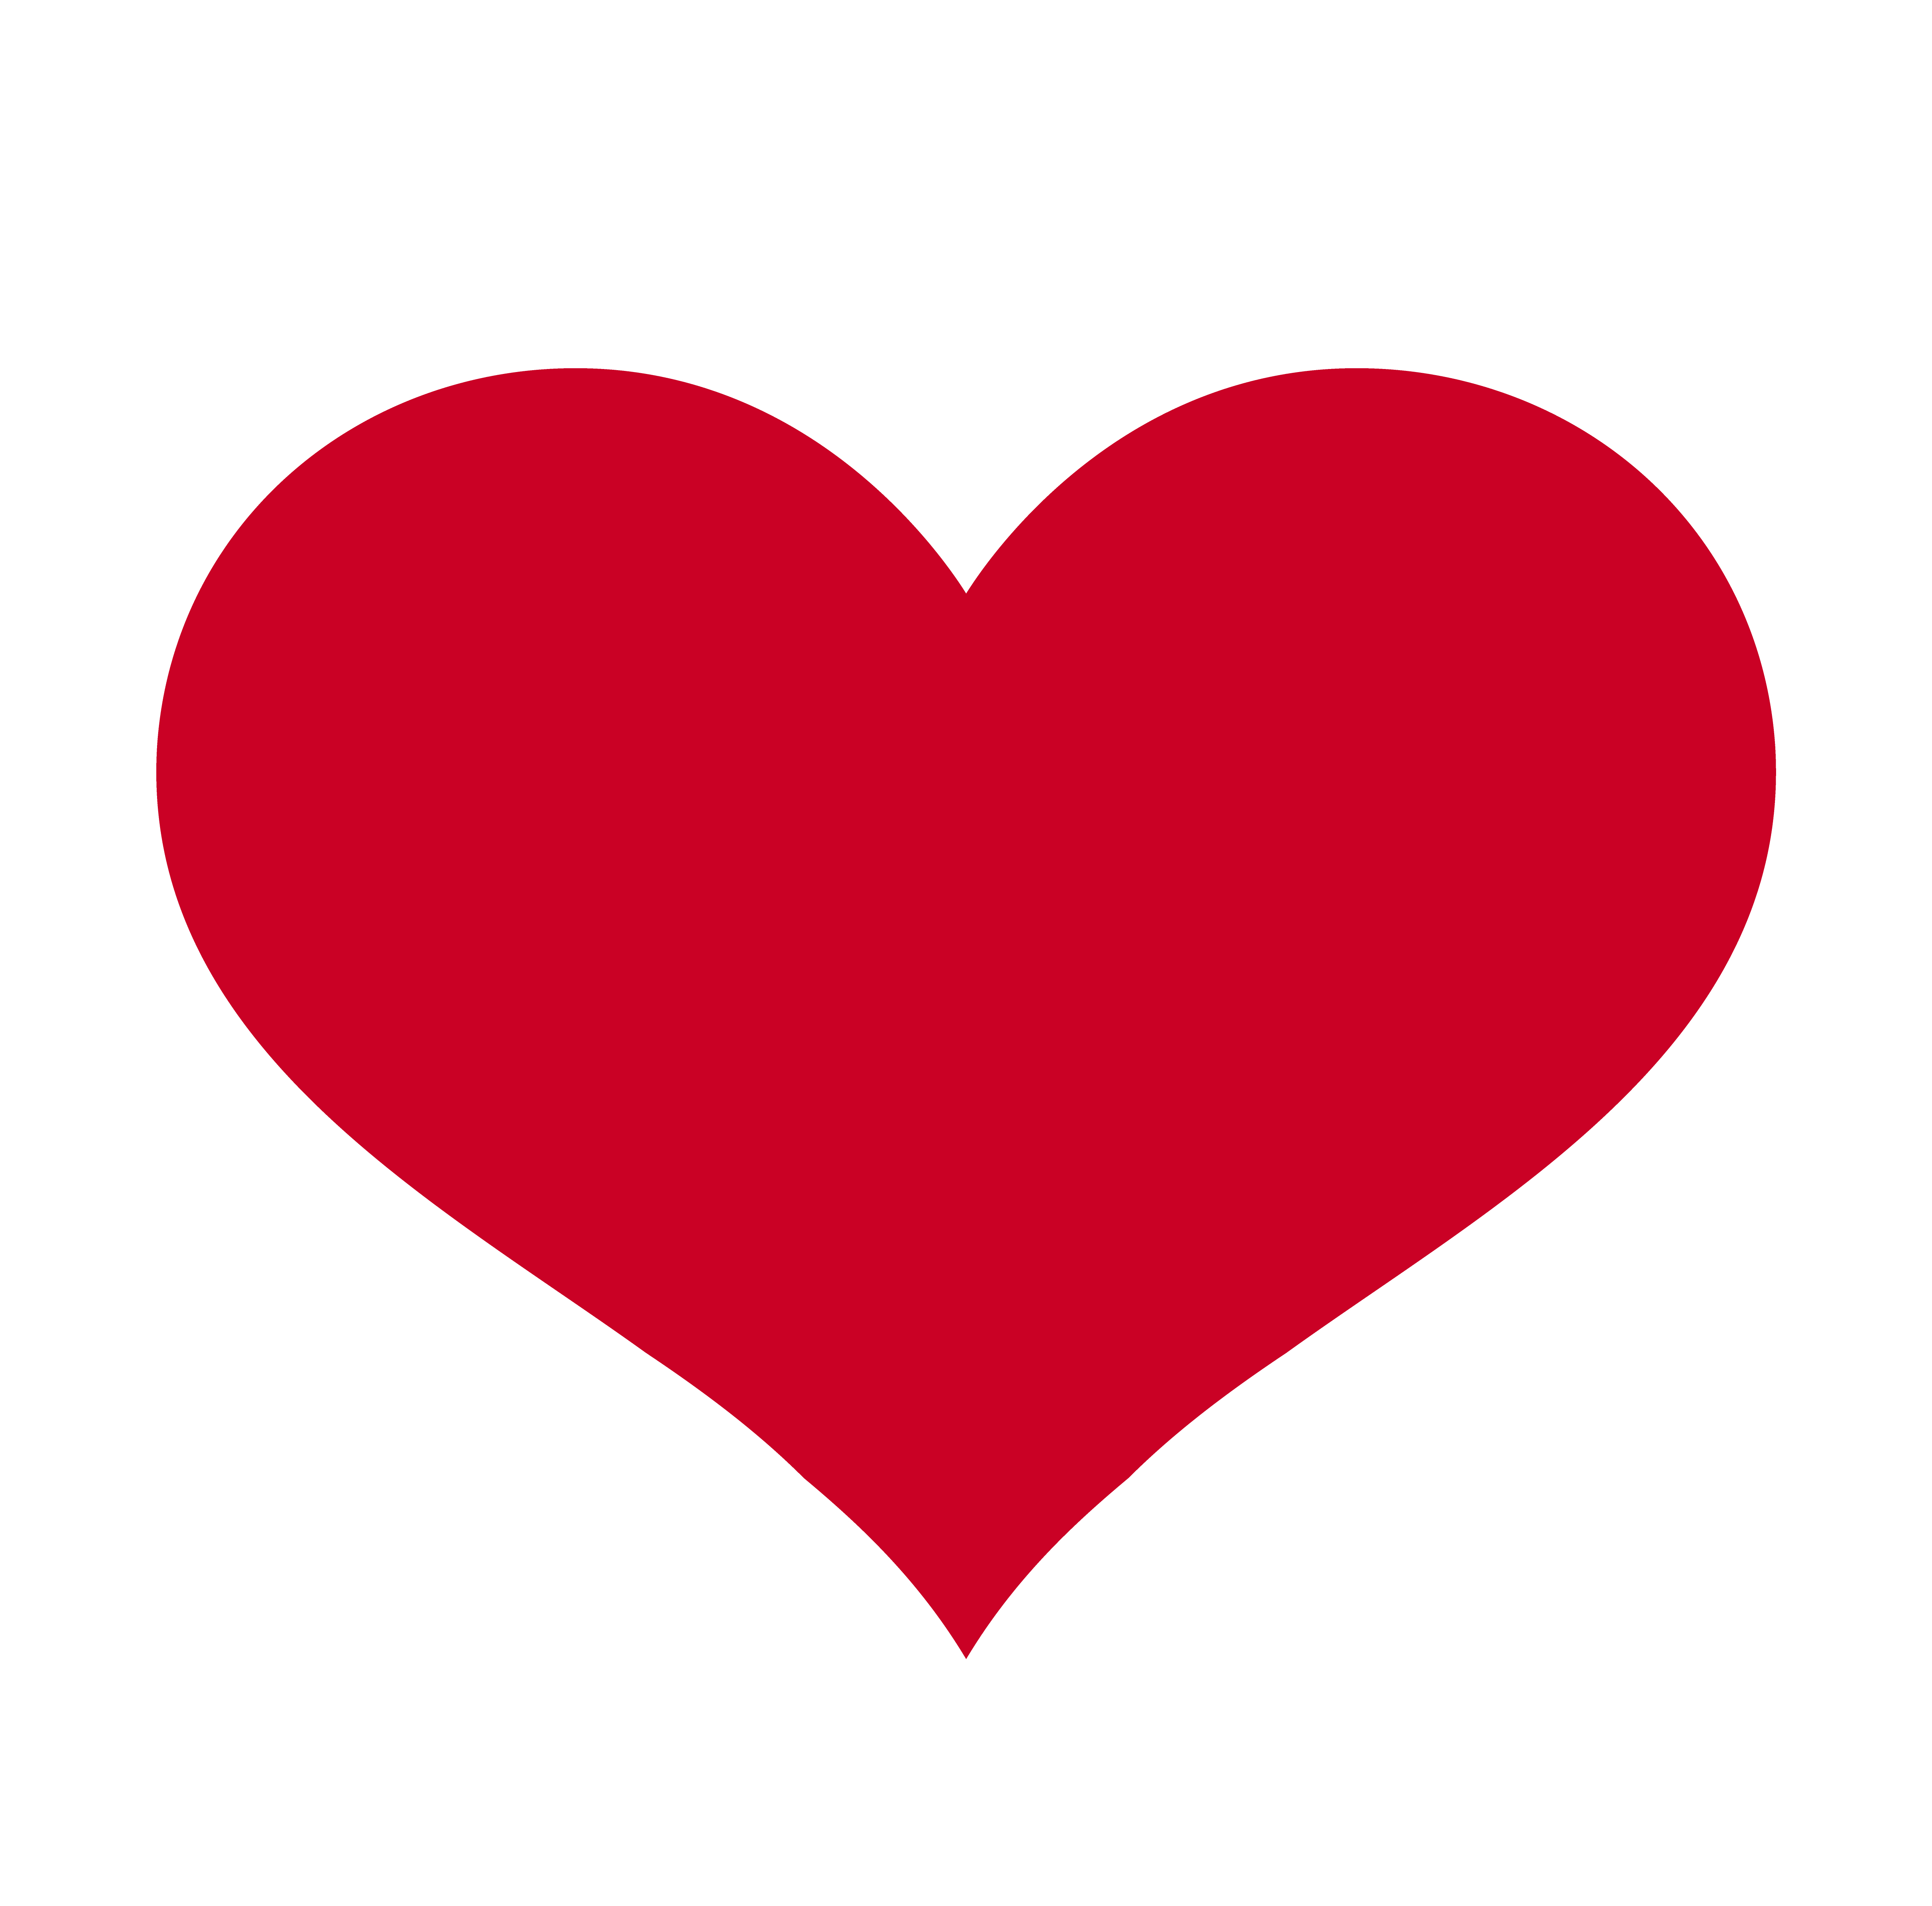 Heart, Symbol of Love and Valentine's Day. Flat Red Icon ...